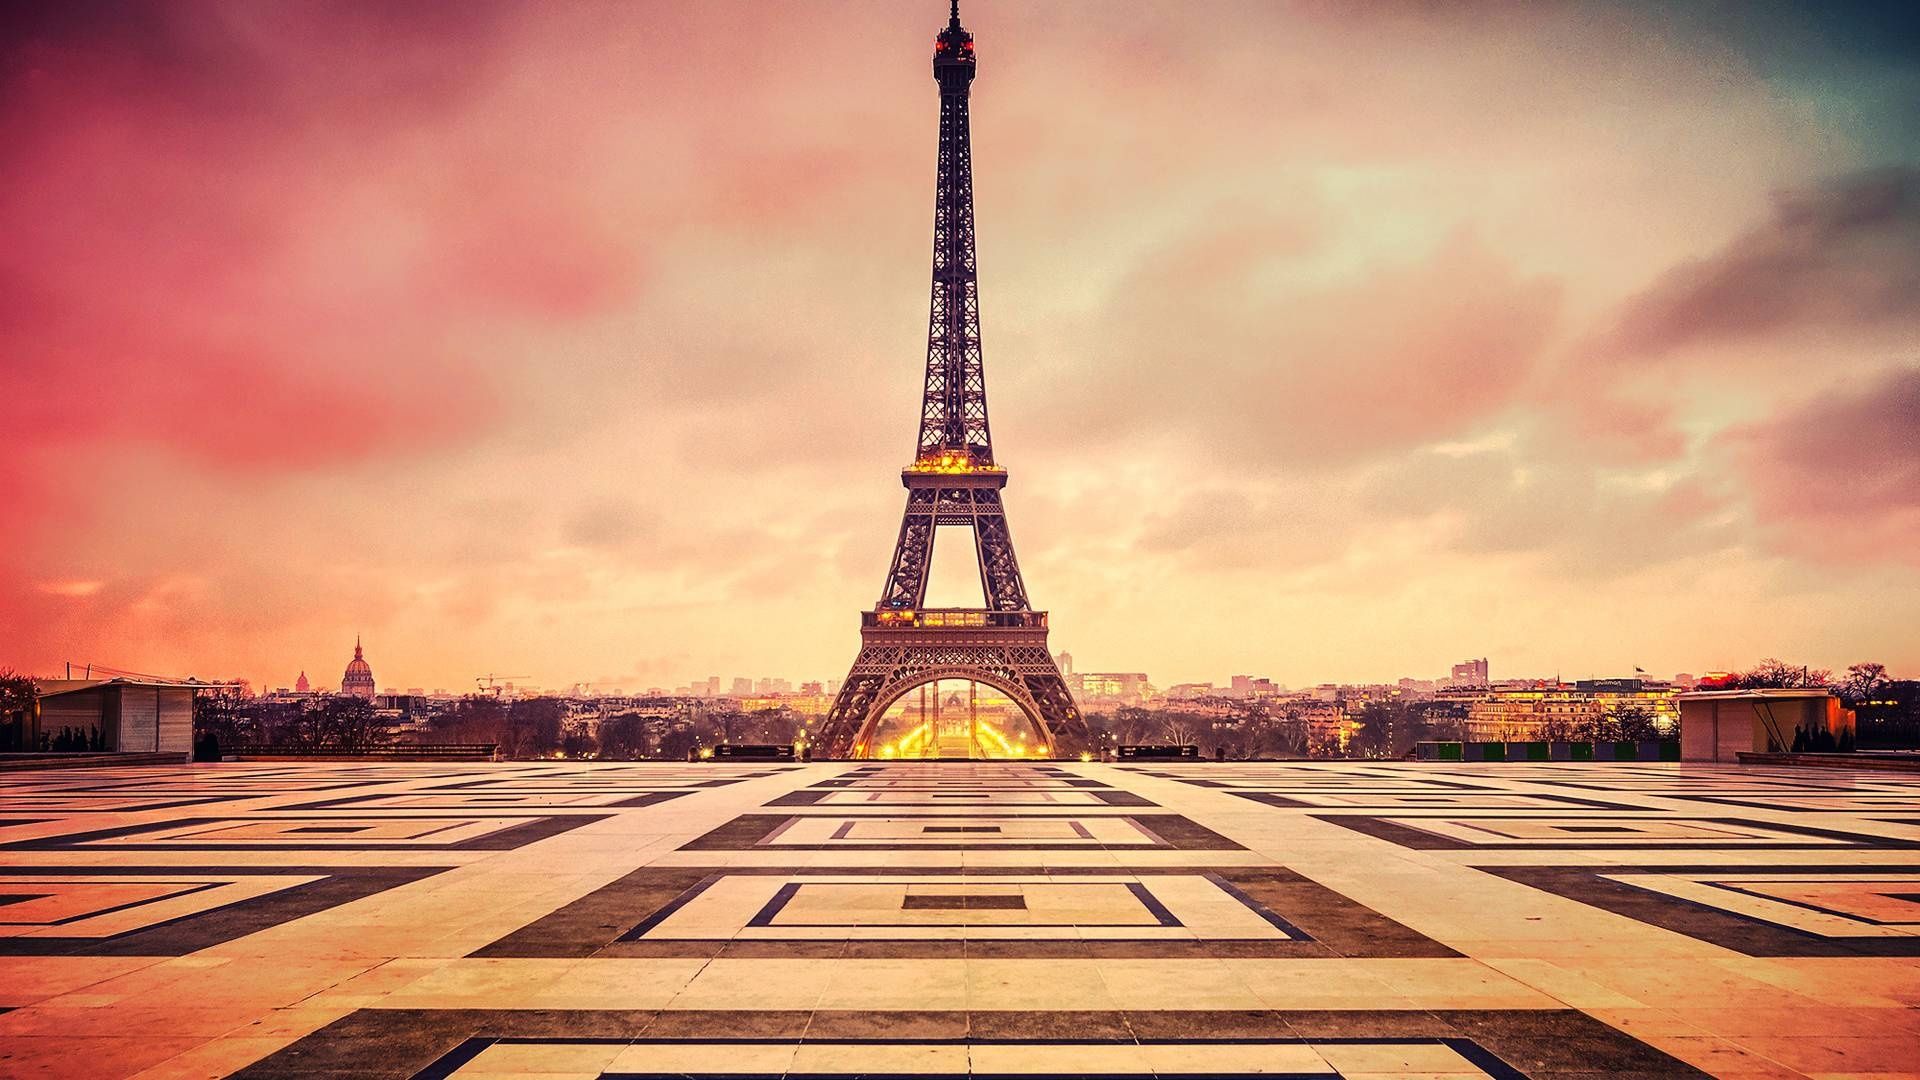 Paris: One of the most famous monuments in the world, the Eiffel Tower. 1920x1080 Full HD Background.